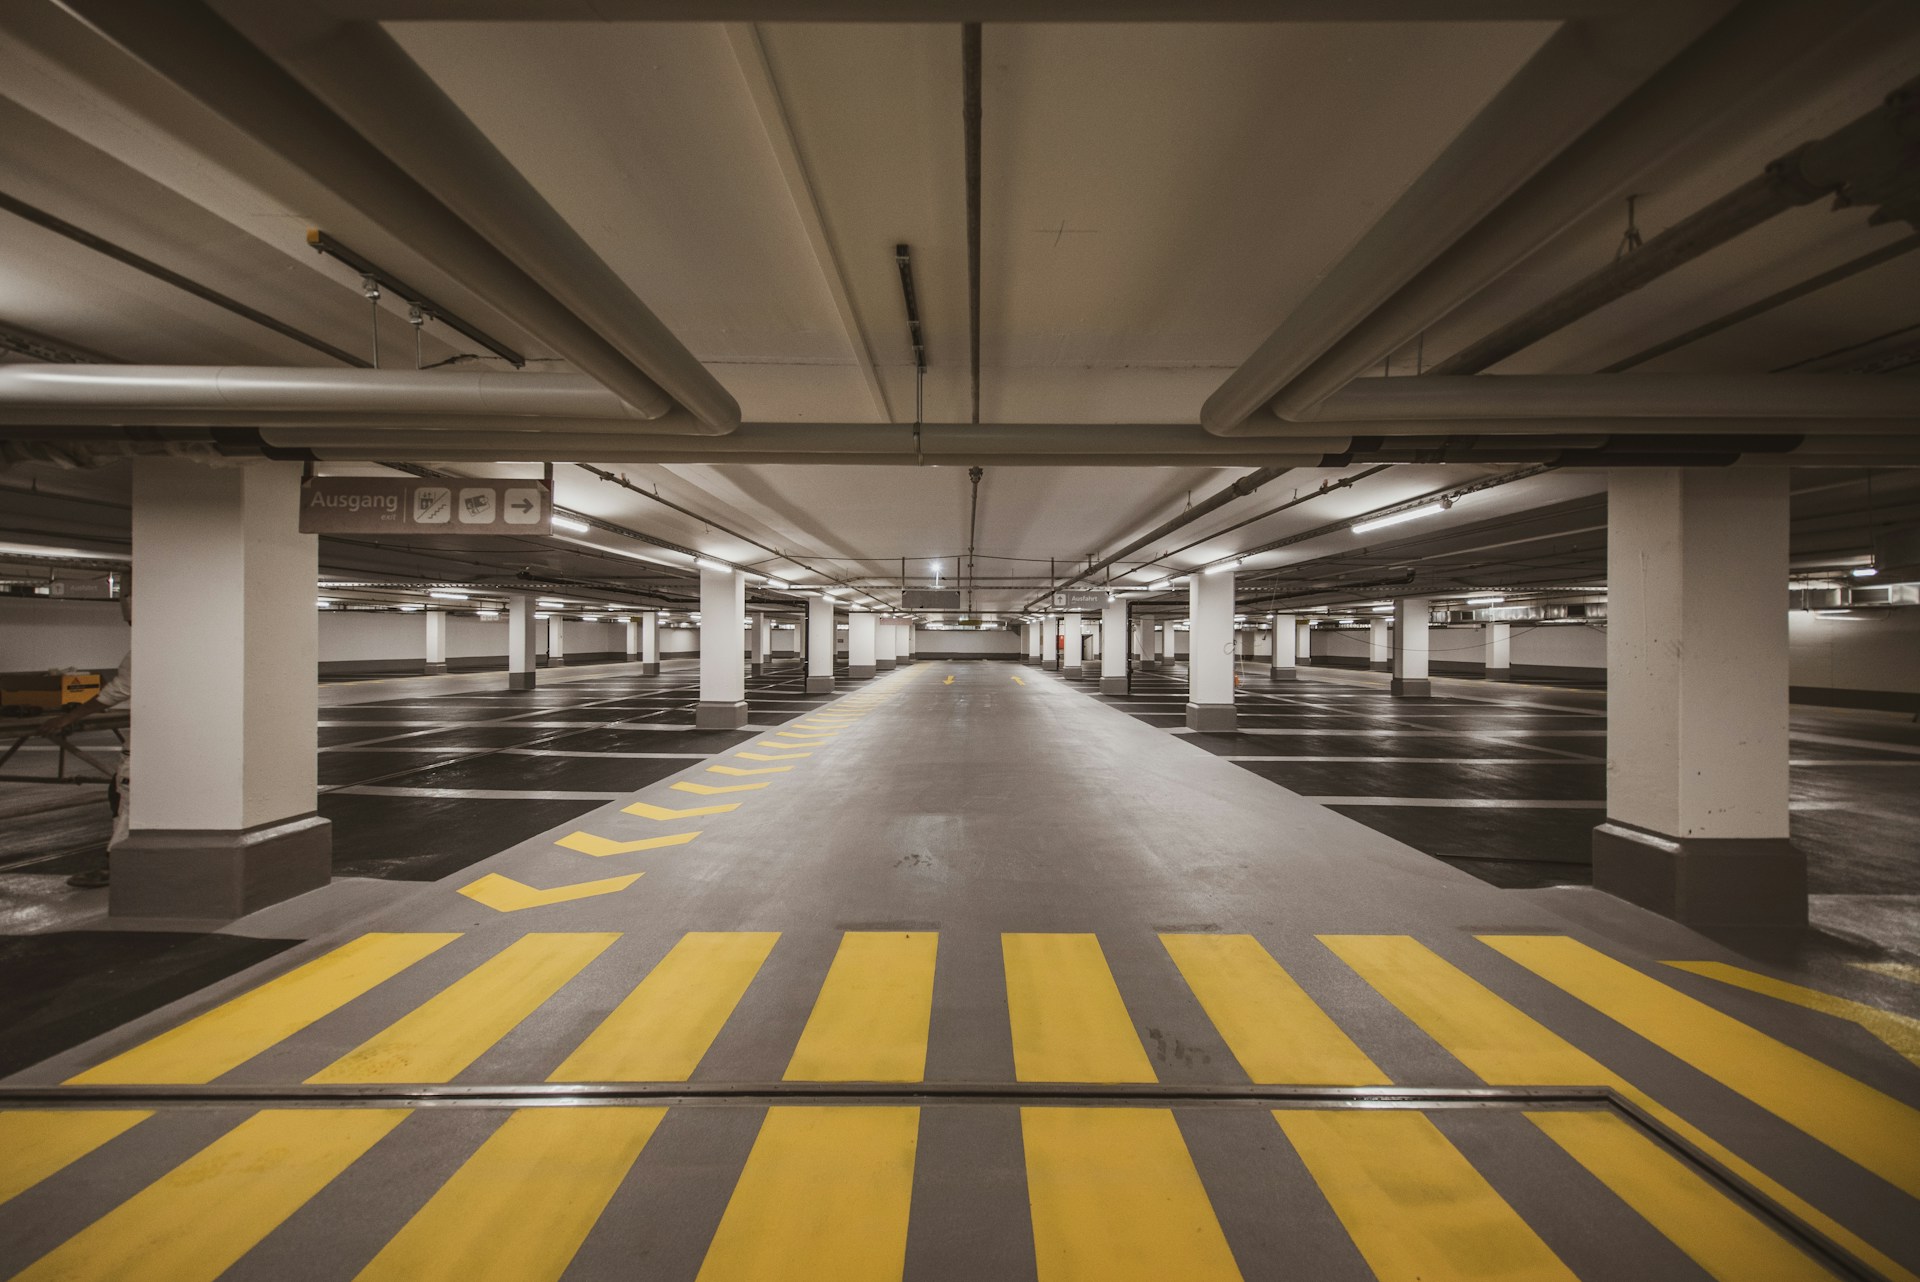 Car park with yellow markings on the ground